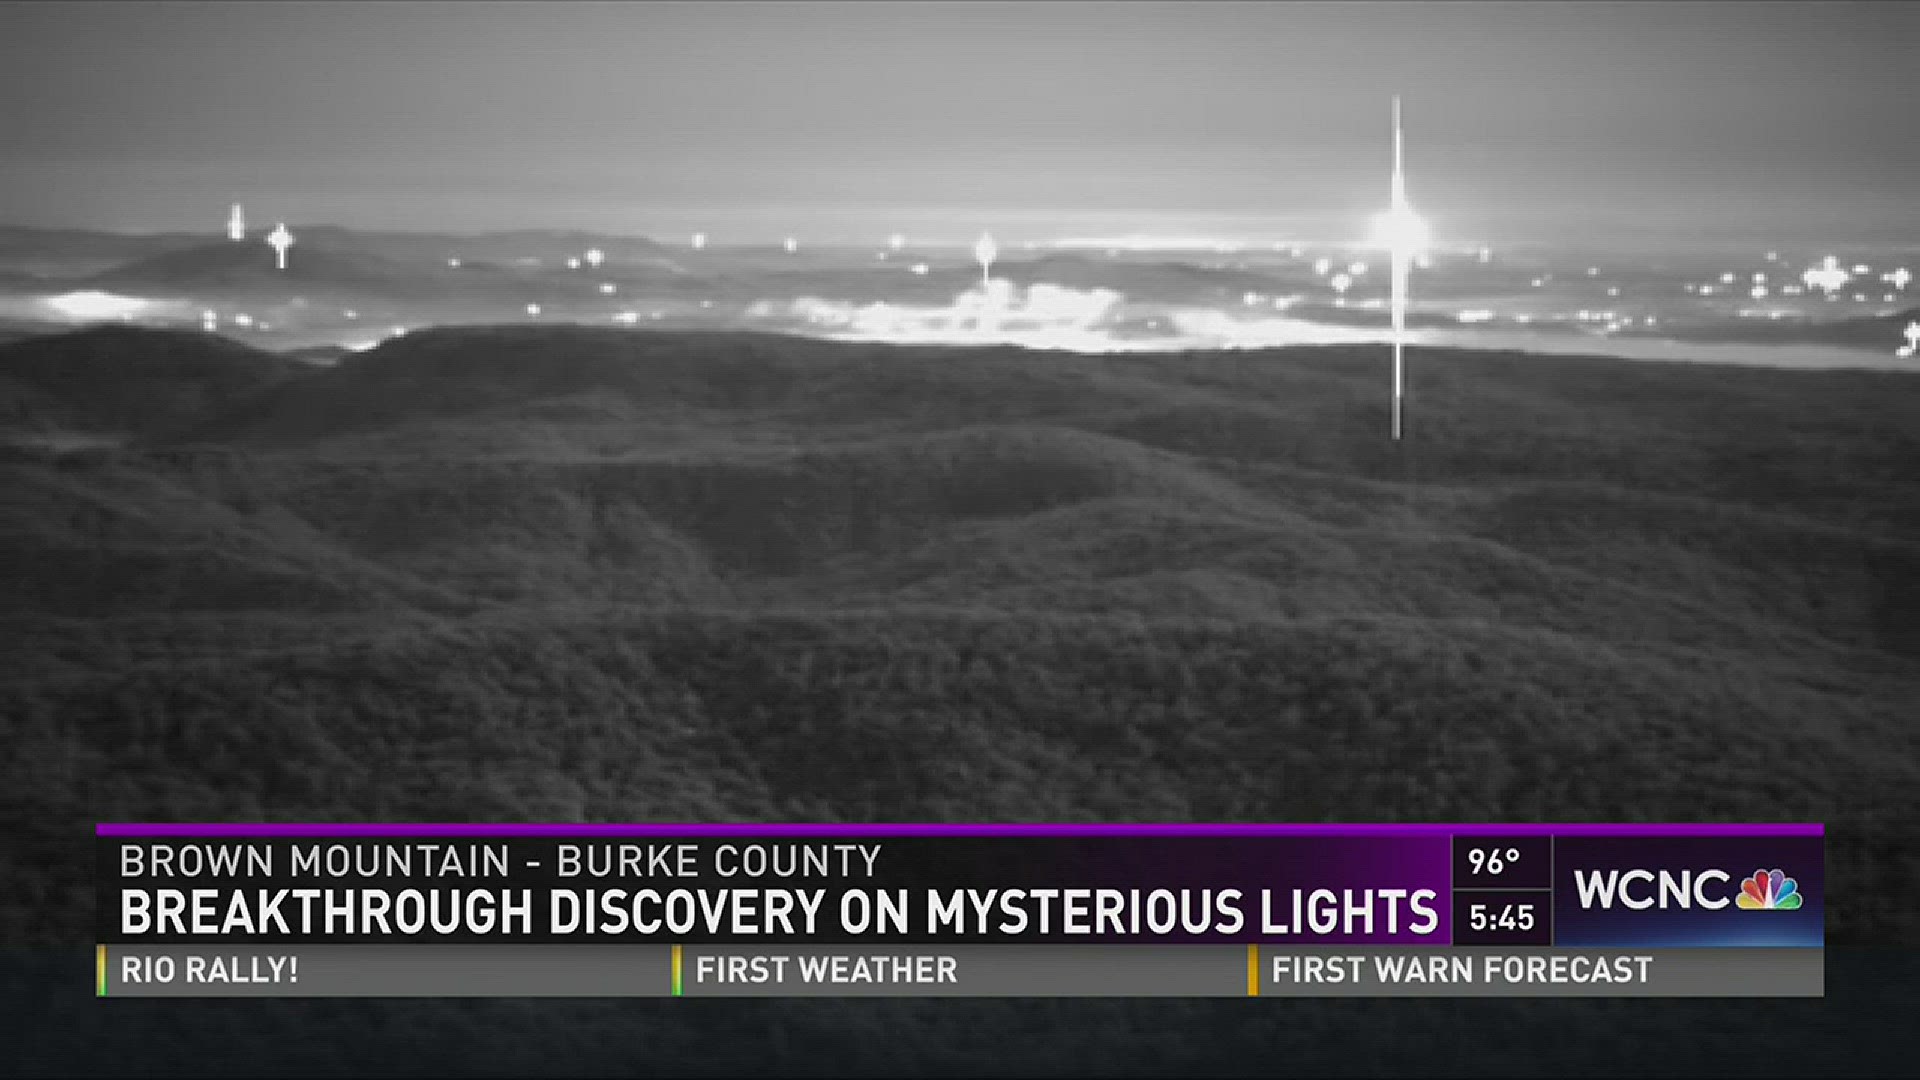 For years we've heard the tales of the mysterious lights seen by people at Brown Mountain in Burke County.